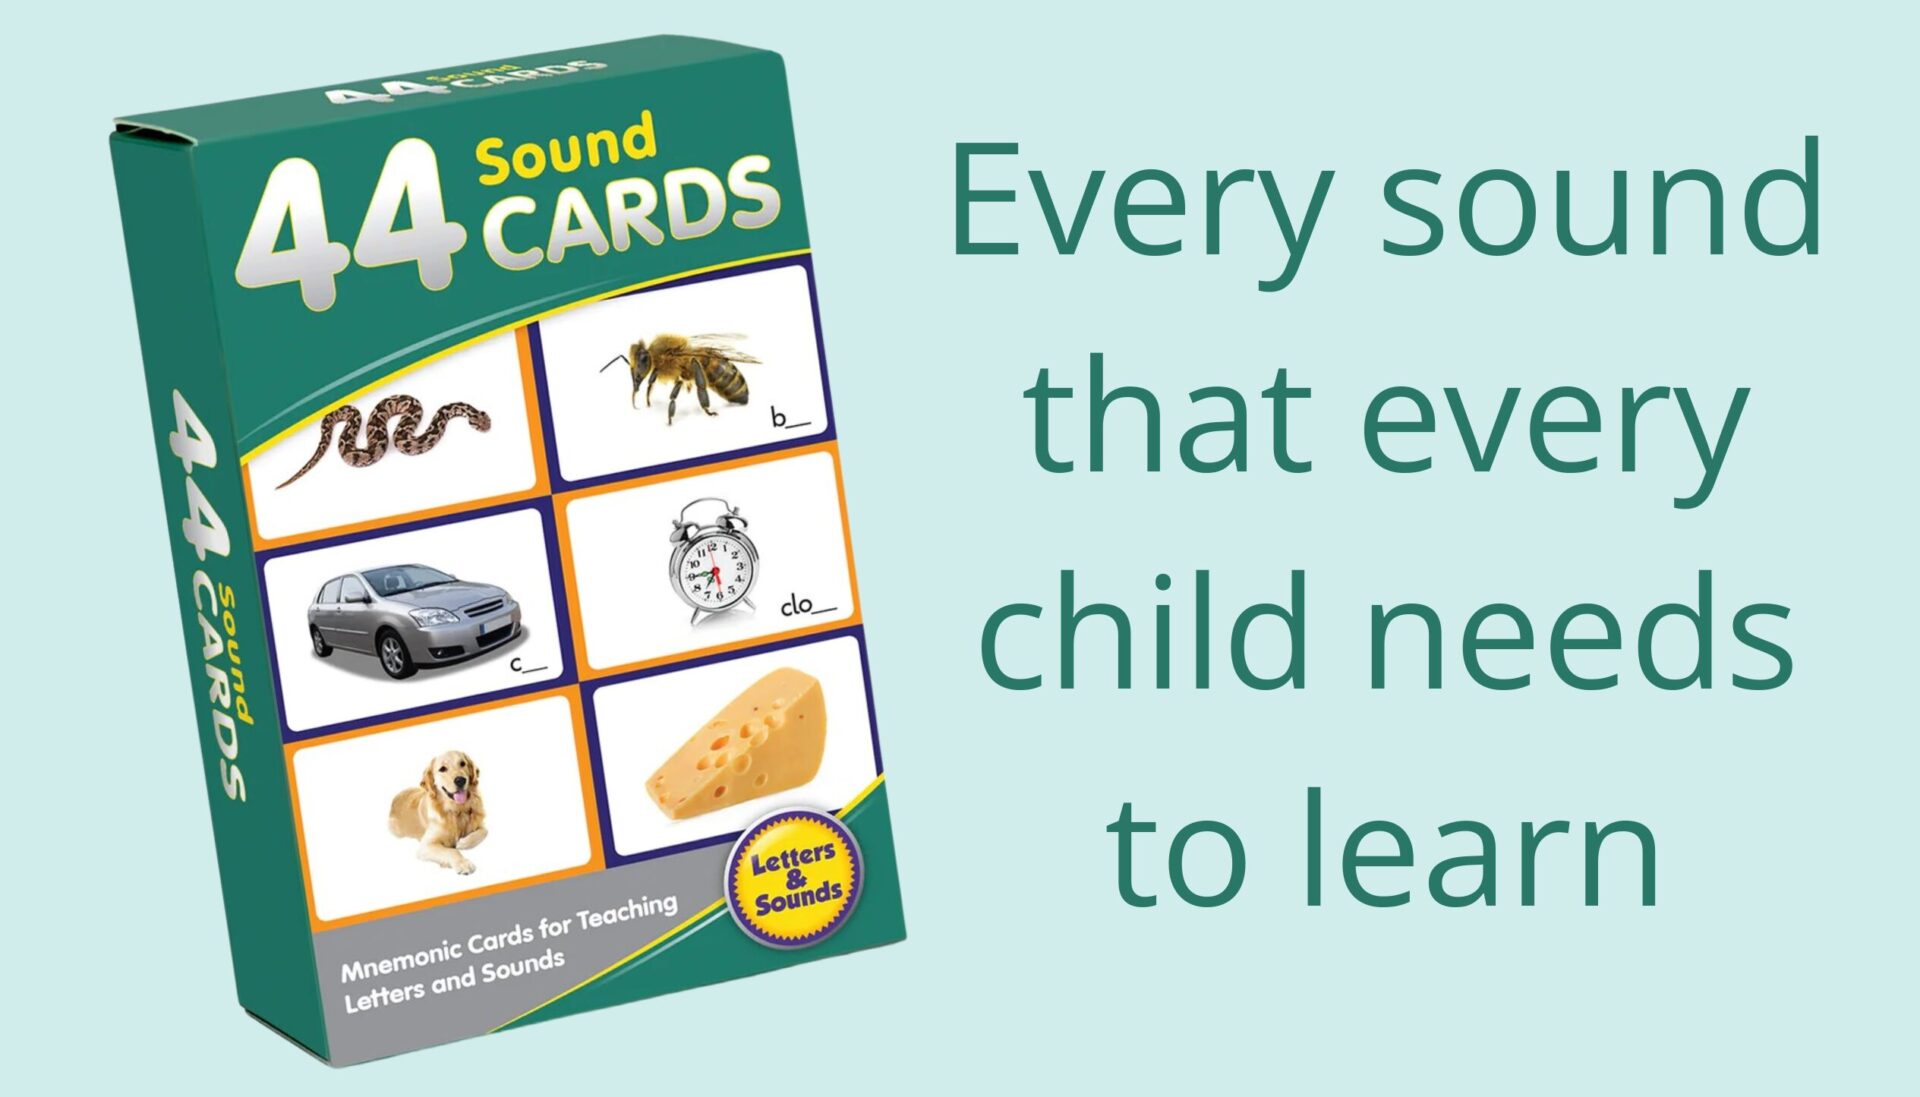 Pack of 44 sound cards with mnemonic and pictures